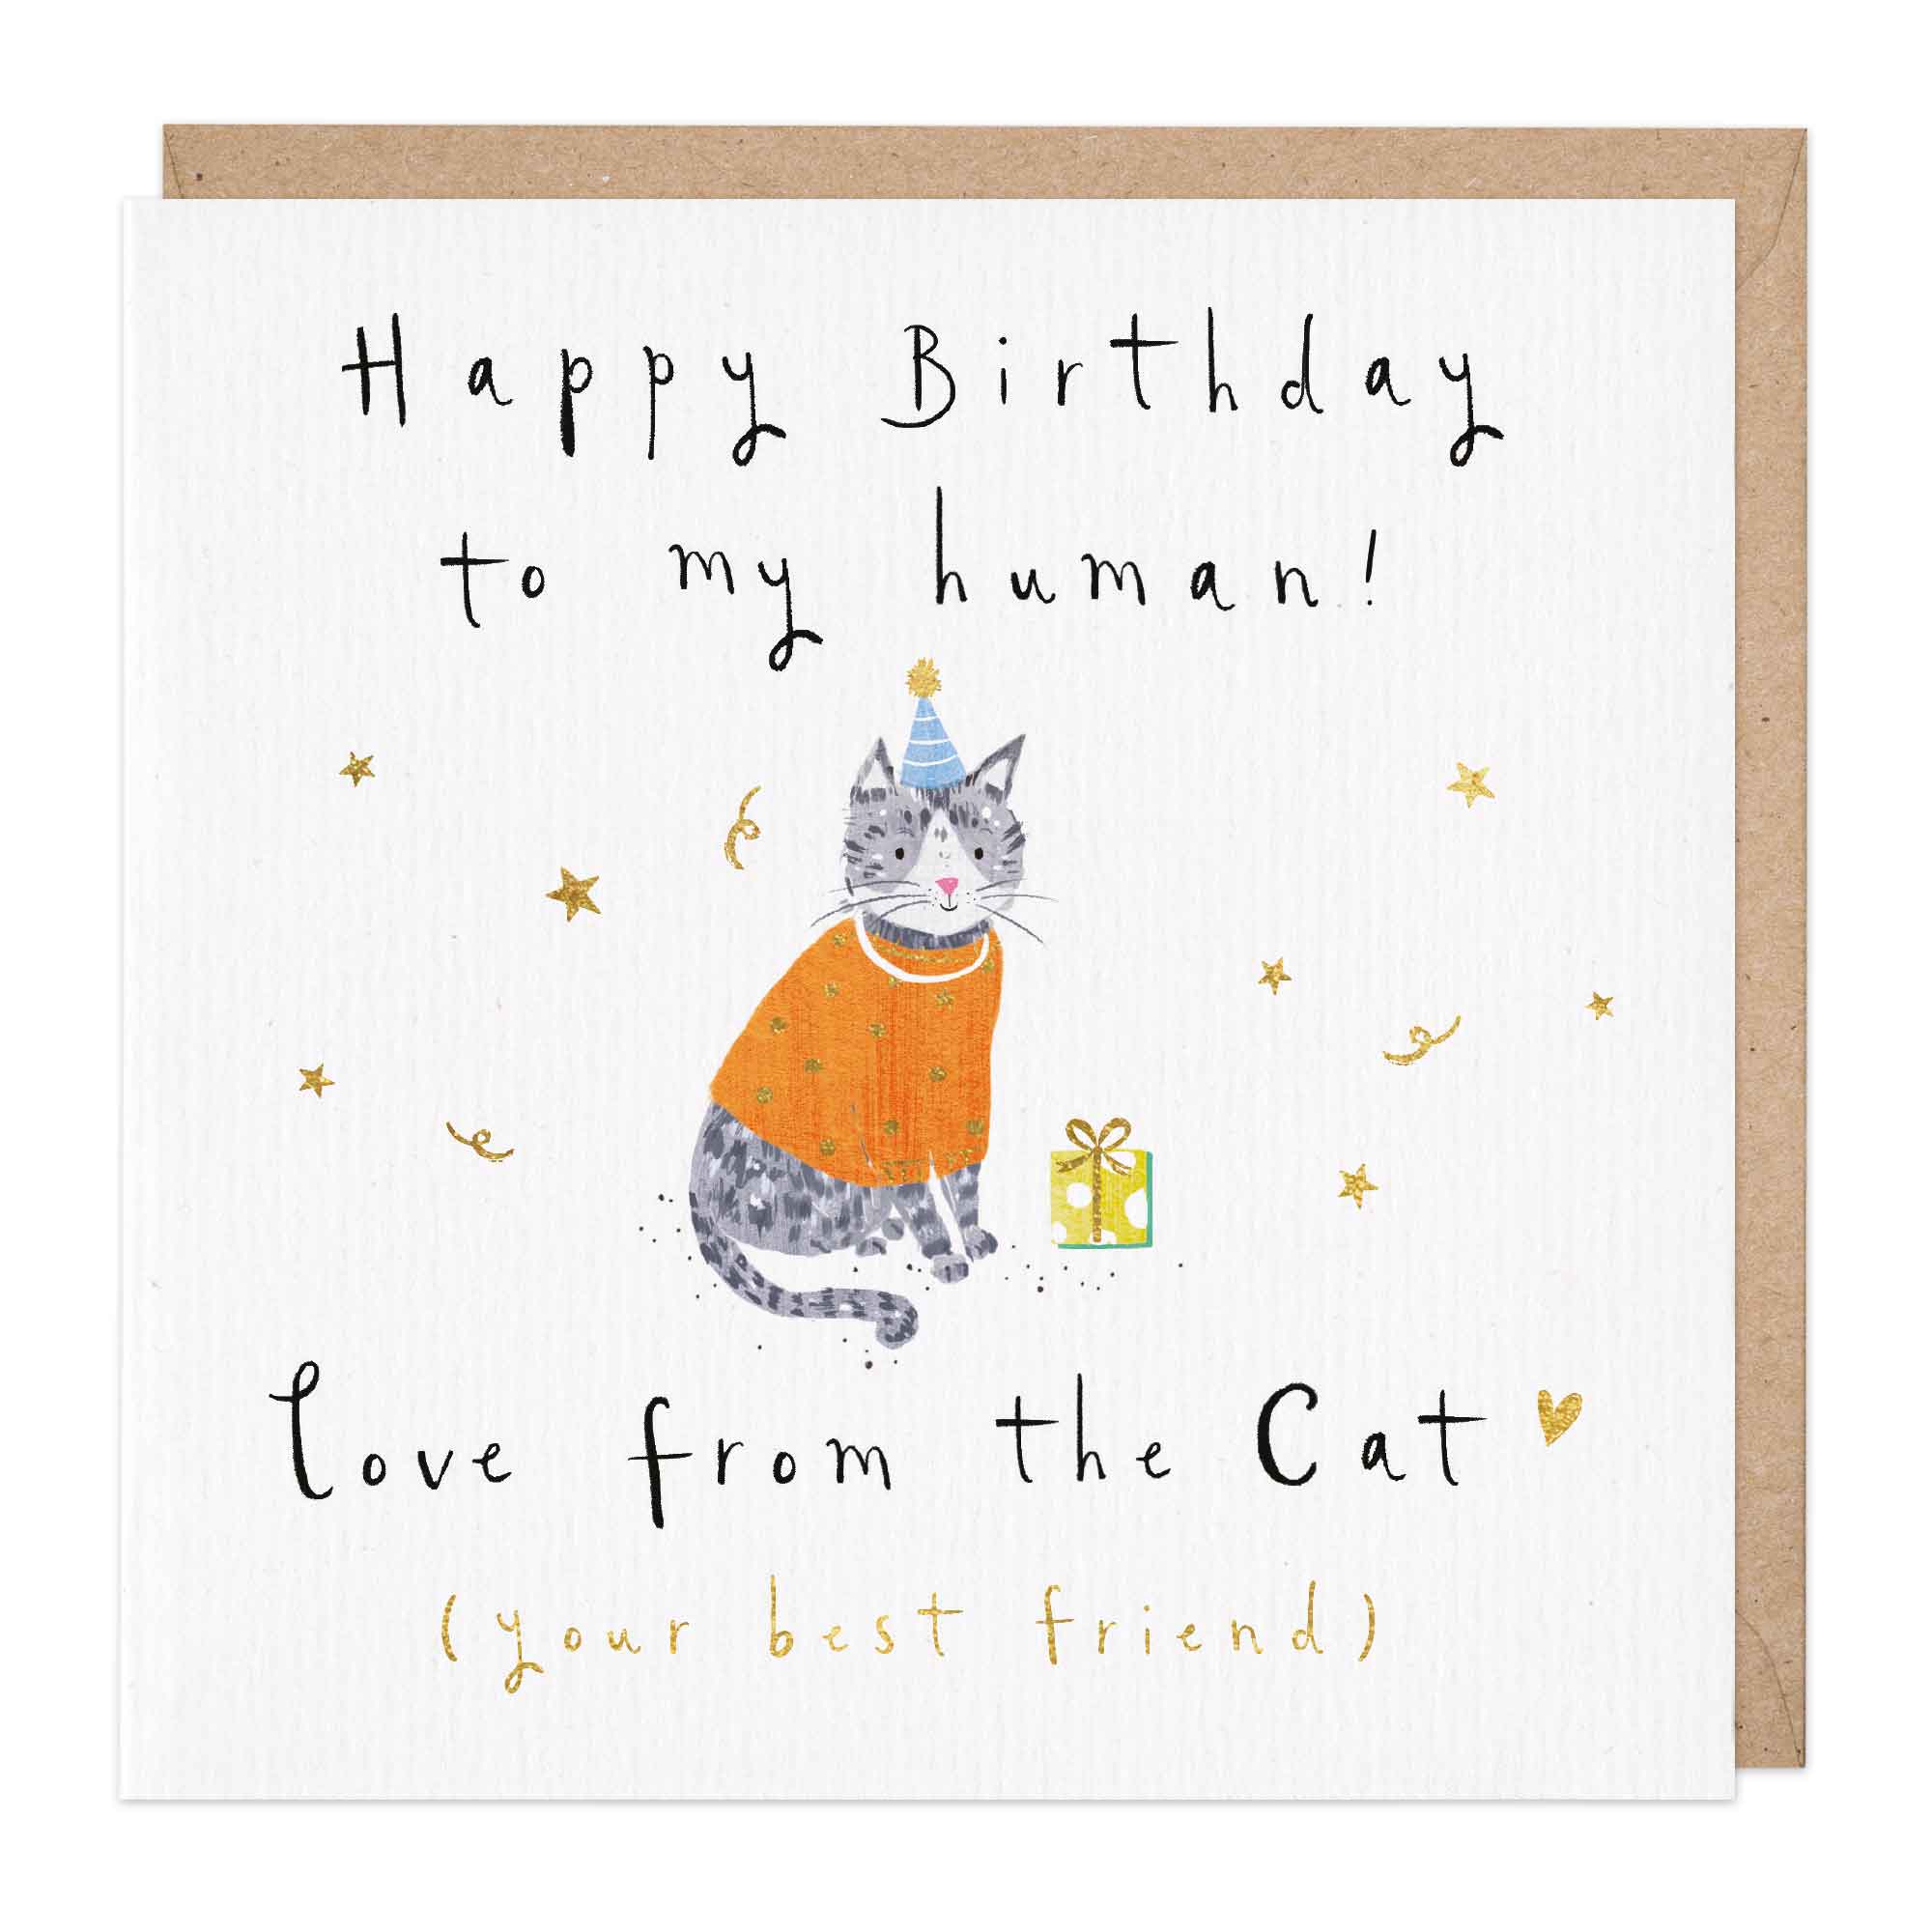 From The Cat Birthday Card